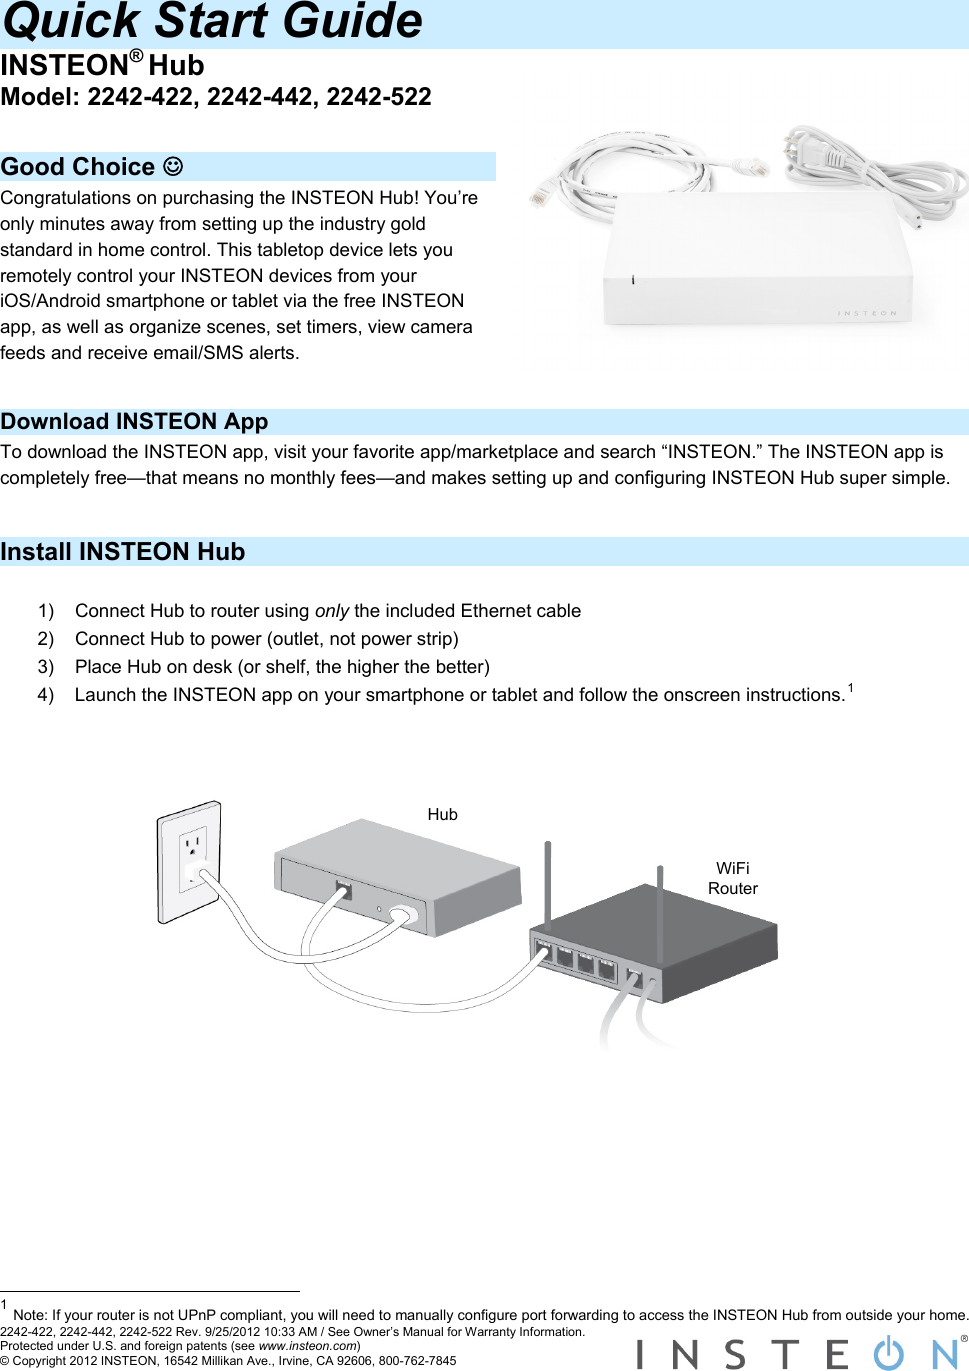 Quick Start Guide INSTEON® Hub Model: 2242-422, 2242-442, 2242-522  Good Choice ☺ Congratulations on purchasing the INSTEON Hub! You’re only minutes away from setting up the industry gold standard in home control. This tabletop device lets you remotely control your INSTEON devices from your iOS/Android smartphone or tablet via the free INSTEON app, as well as organize scenes, set timers, view camera feeds and receive email/SMS alerts.   Download INSTEON App To download the INSTEON app, visit your favorite app/marketplace and search “INSTEON.” The INSTEON app is completely free—that means no monthly fees—and makes setting up and configuring INSTEON Hub super simple.  Install INSTEON Hub  1)  Connect Hub to router using only the included Ethernet cable 2)  Connect Hub to power (outlet, not power strip) 3)  Place Hub on desk (or shelf, the higher the better) 4)  Launch the INSTEON app on your smartphone or tablet and follow the onscreen instructions.1   Hub WiFi Router                                                                    2242-422, 2242-442, 2242-522 Rev. 9/25/2012 10:33 AM / See Owner’s Manual for Warranty Information. Protected under U.S. and foreign patents (see www.insteon.com) © Copyright 2012 INSTEON, 16542 Millikan Ave., Irvine, CA 92606, 800-762-7845   1 Note: If your router is not UPnP compliant, you will need to manually configure port forwarding to access the INSTEON Hub from outside your home. 